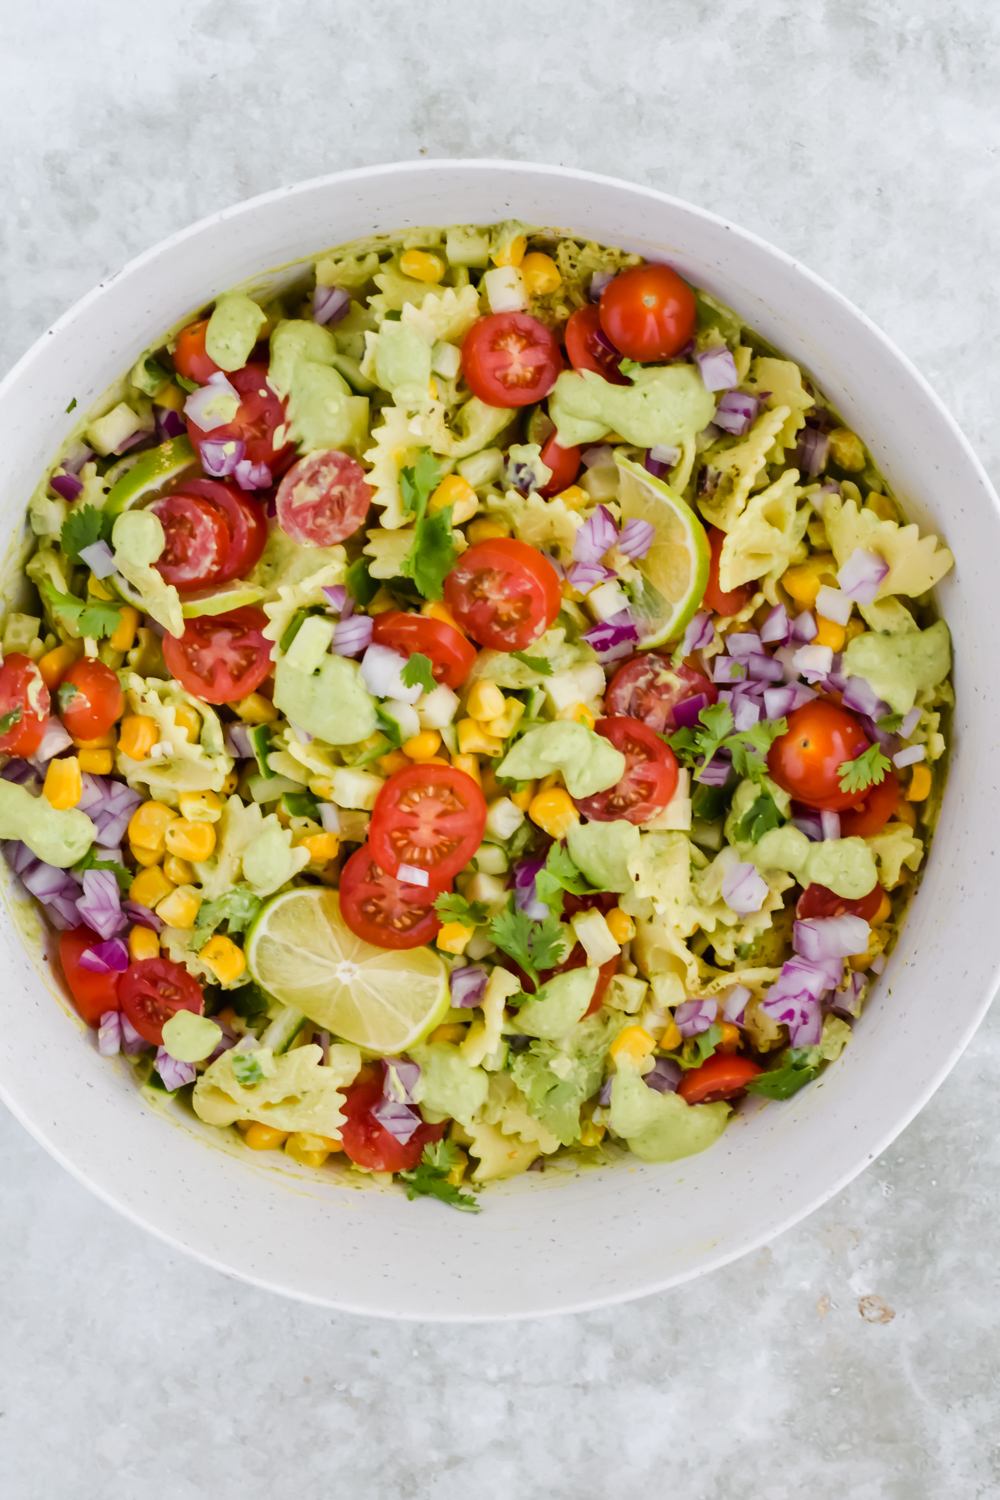 cilantro lime pasta salad tossed in large white mixing bowl on light gray background.